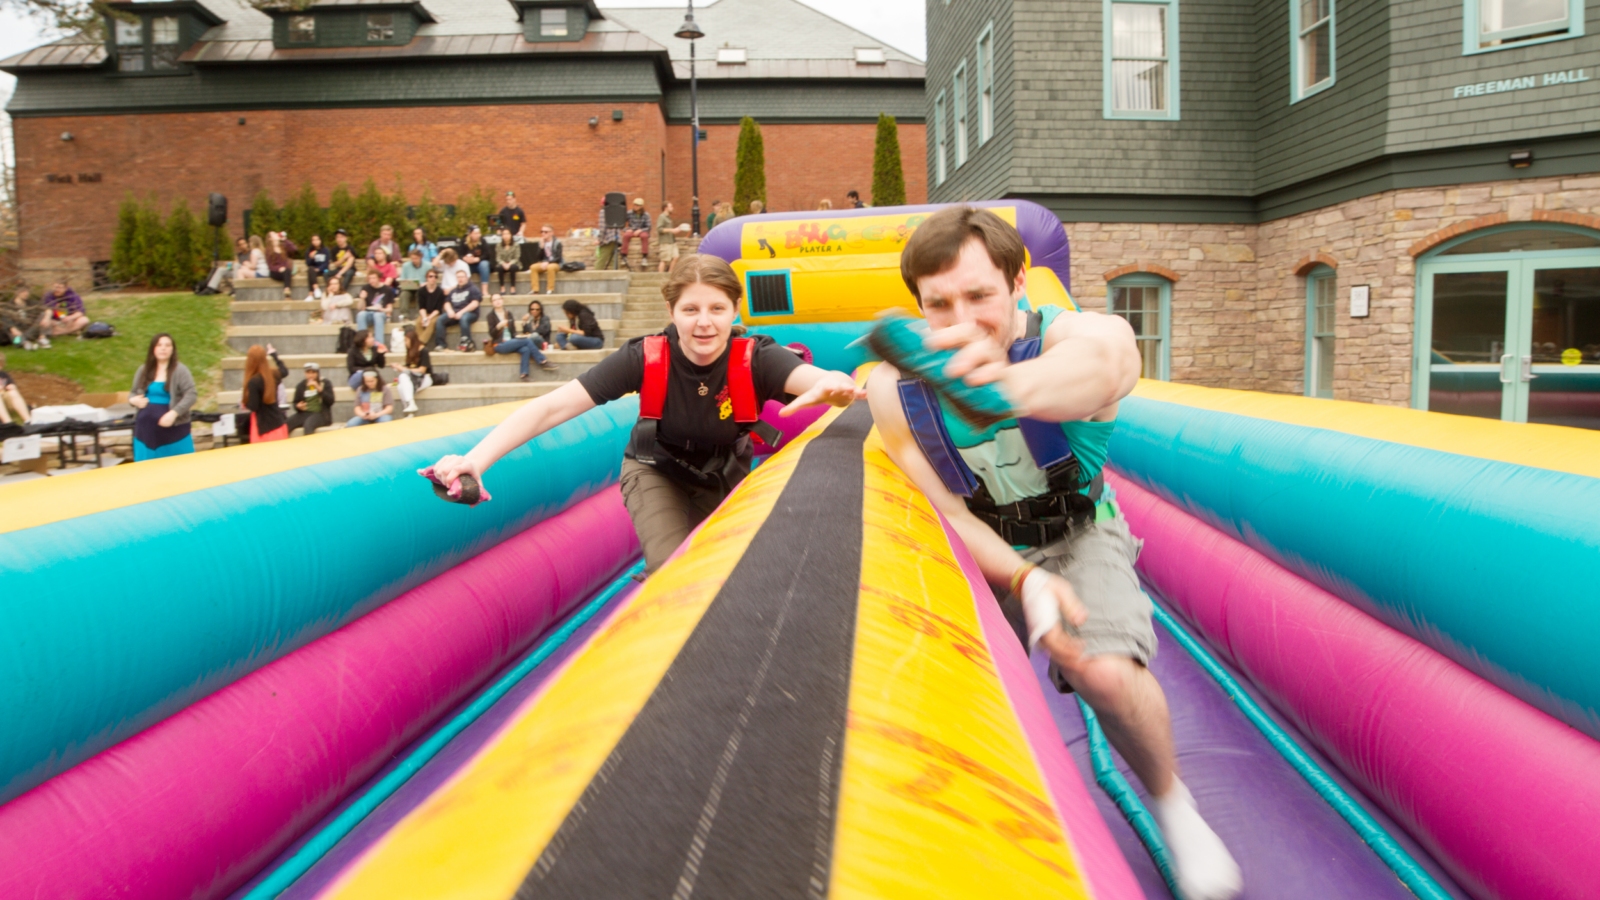 Two students race on an inflatable obstacle course.